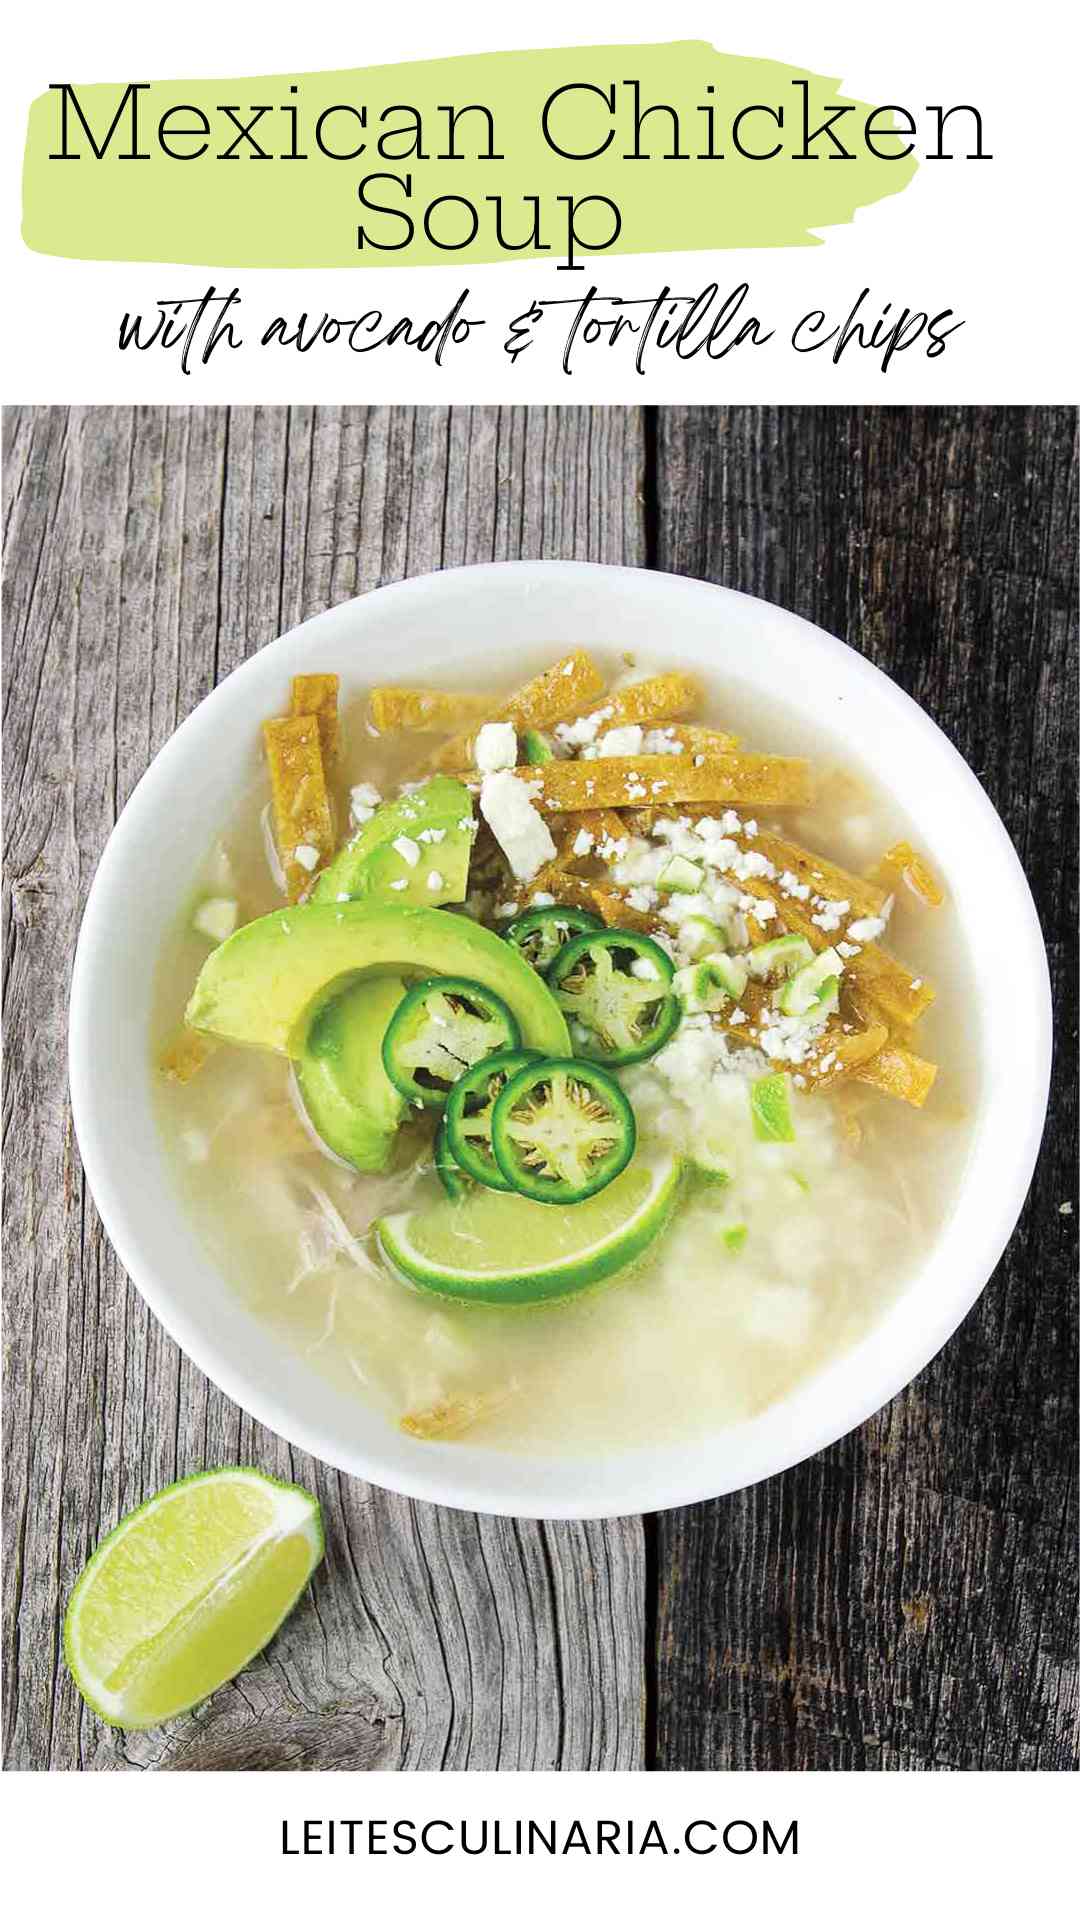 A white bowl filled with broth, avocado slices, lime wedges, cheese, and tortilla strips.